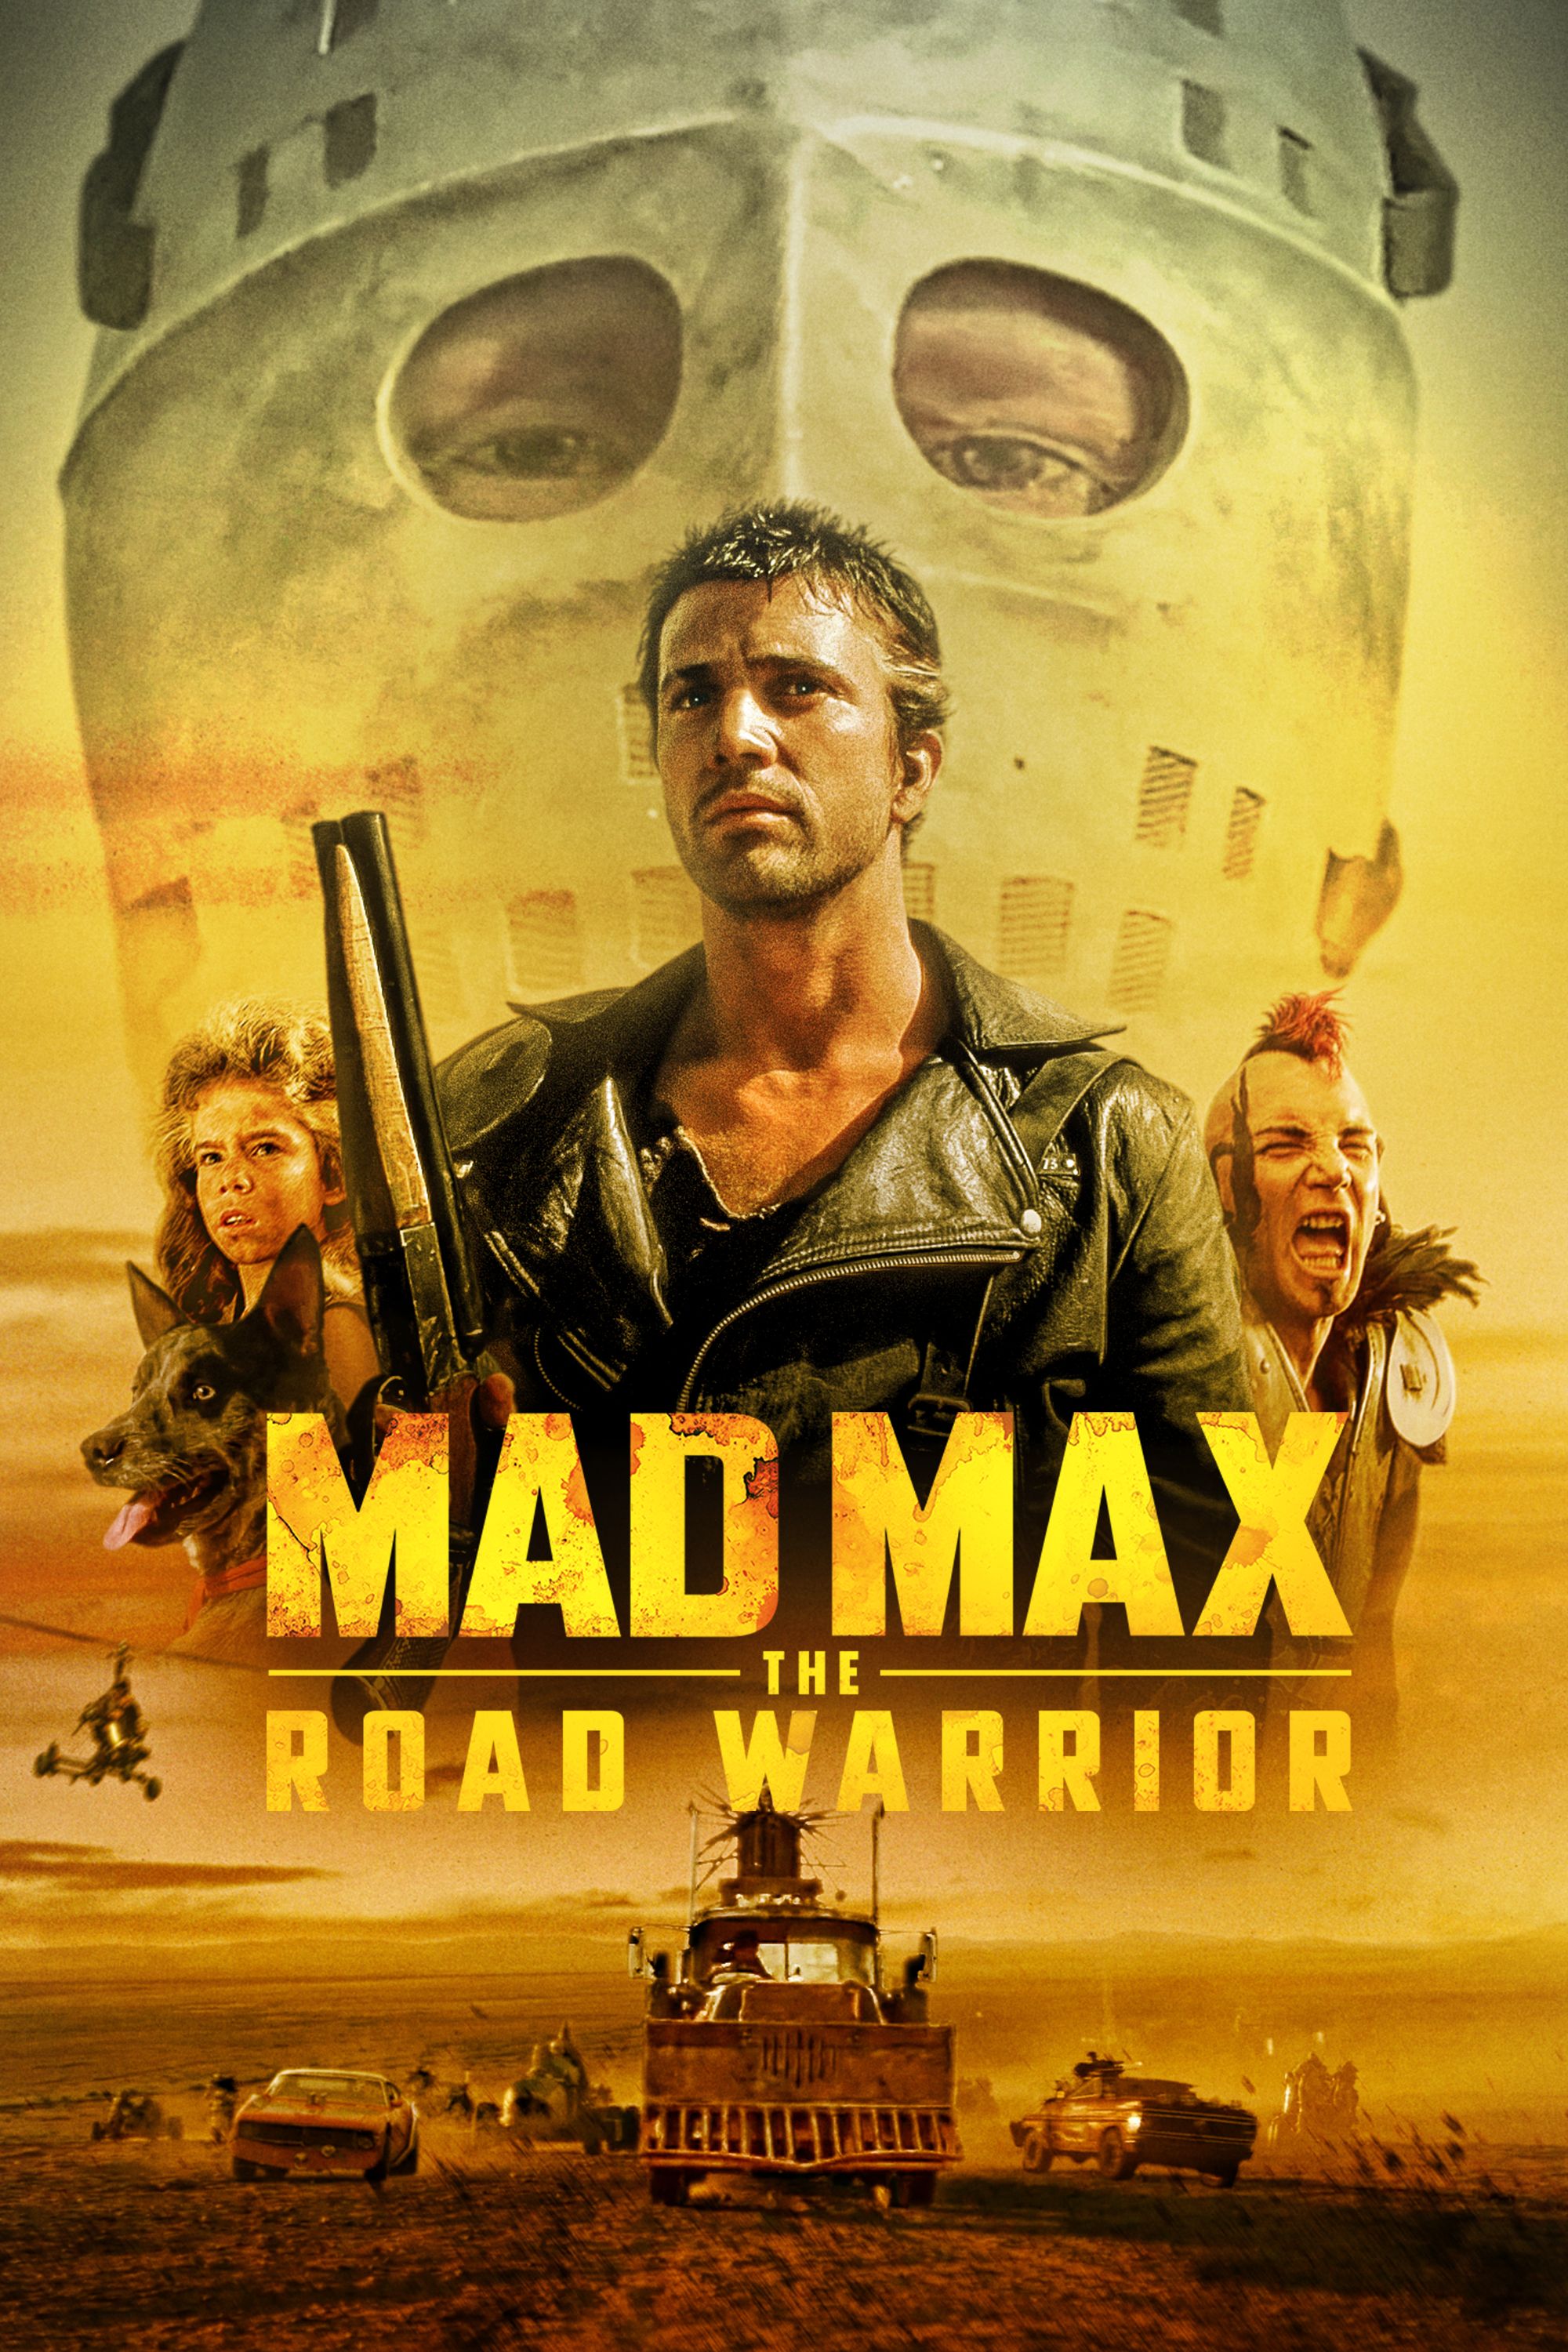 watch online mad max fury road in hindi